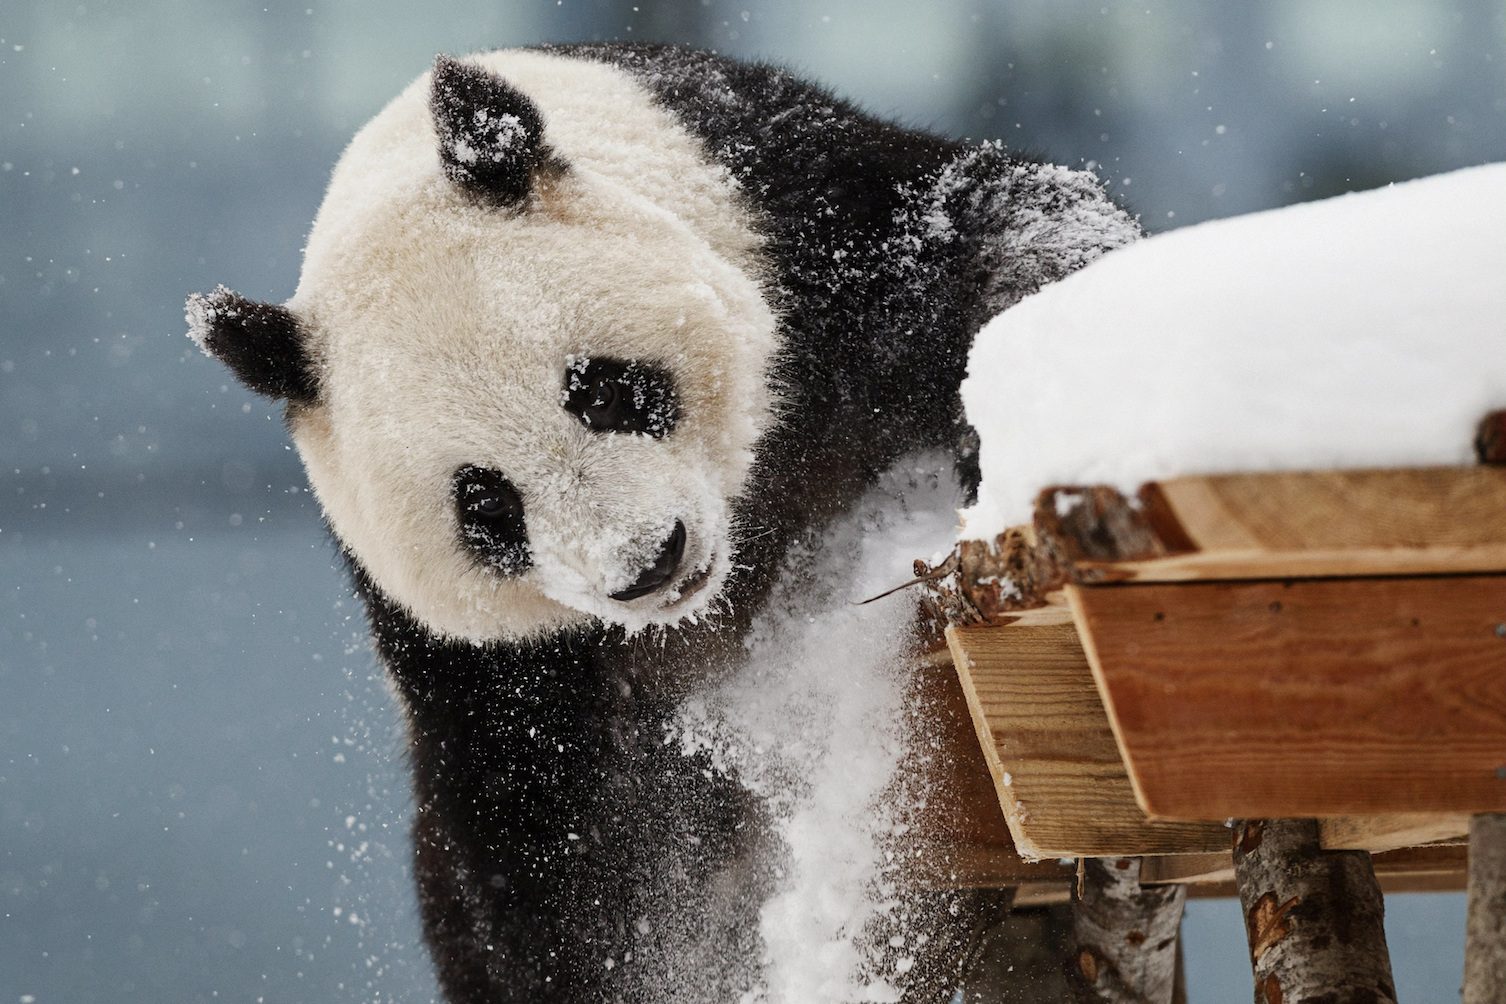 Cash-strapped Finnish zoo may have to return giant pandas to China